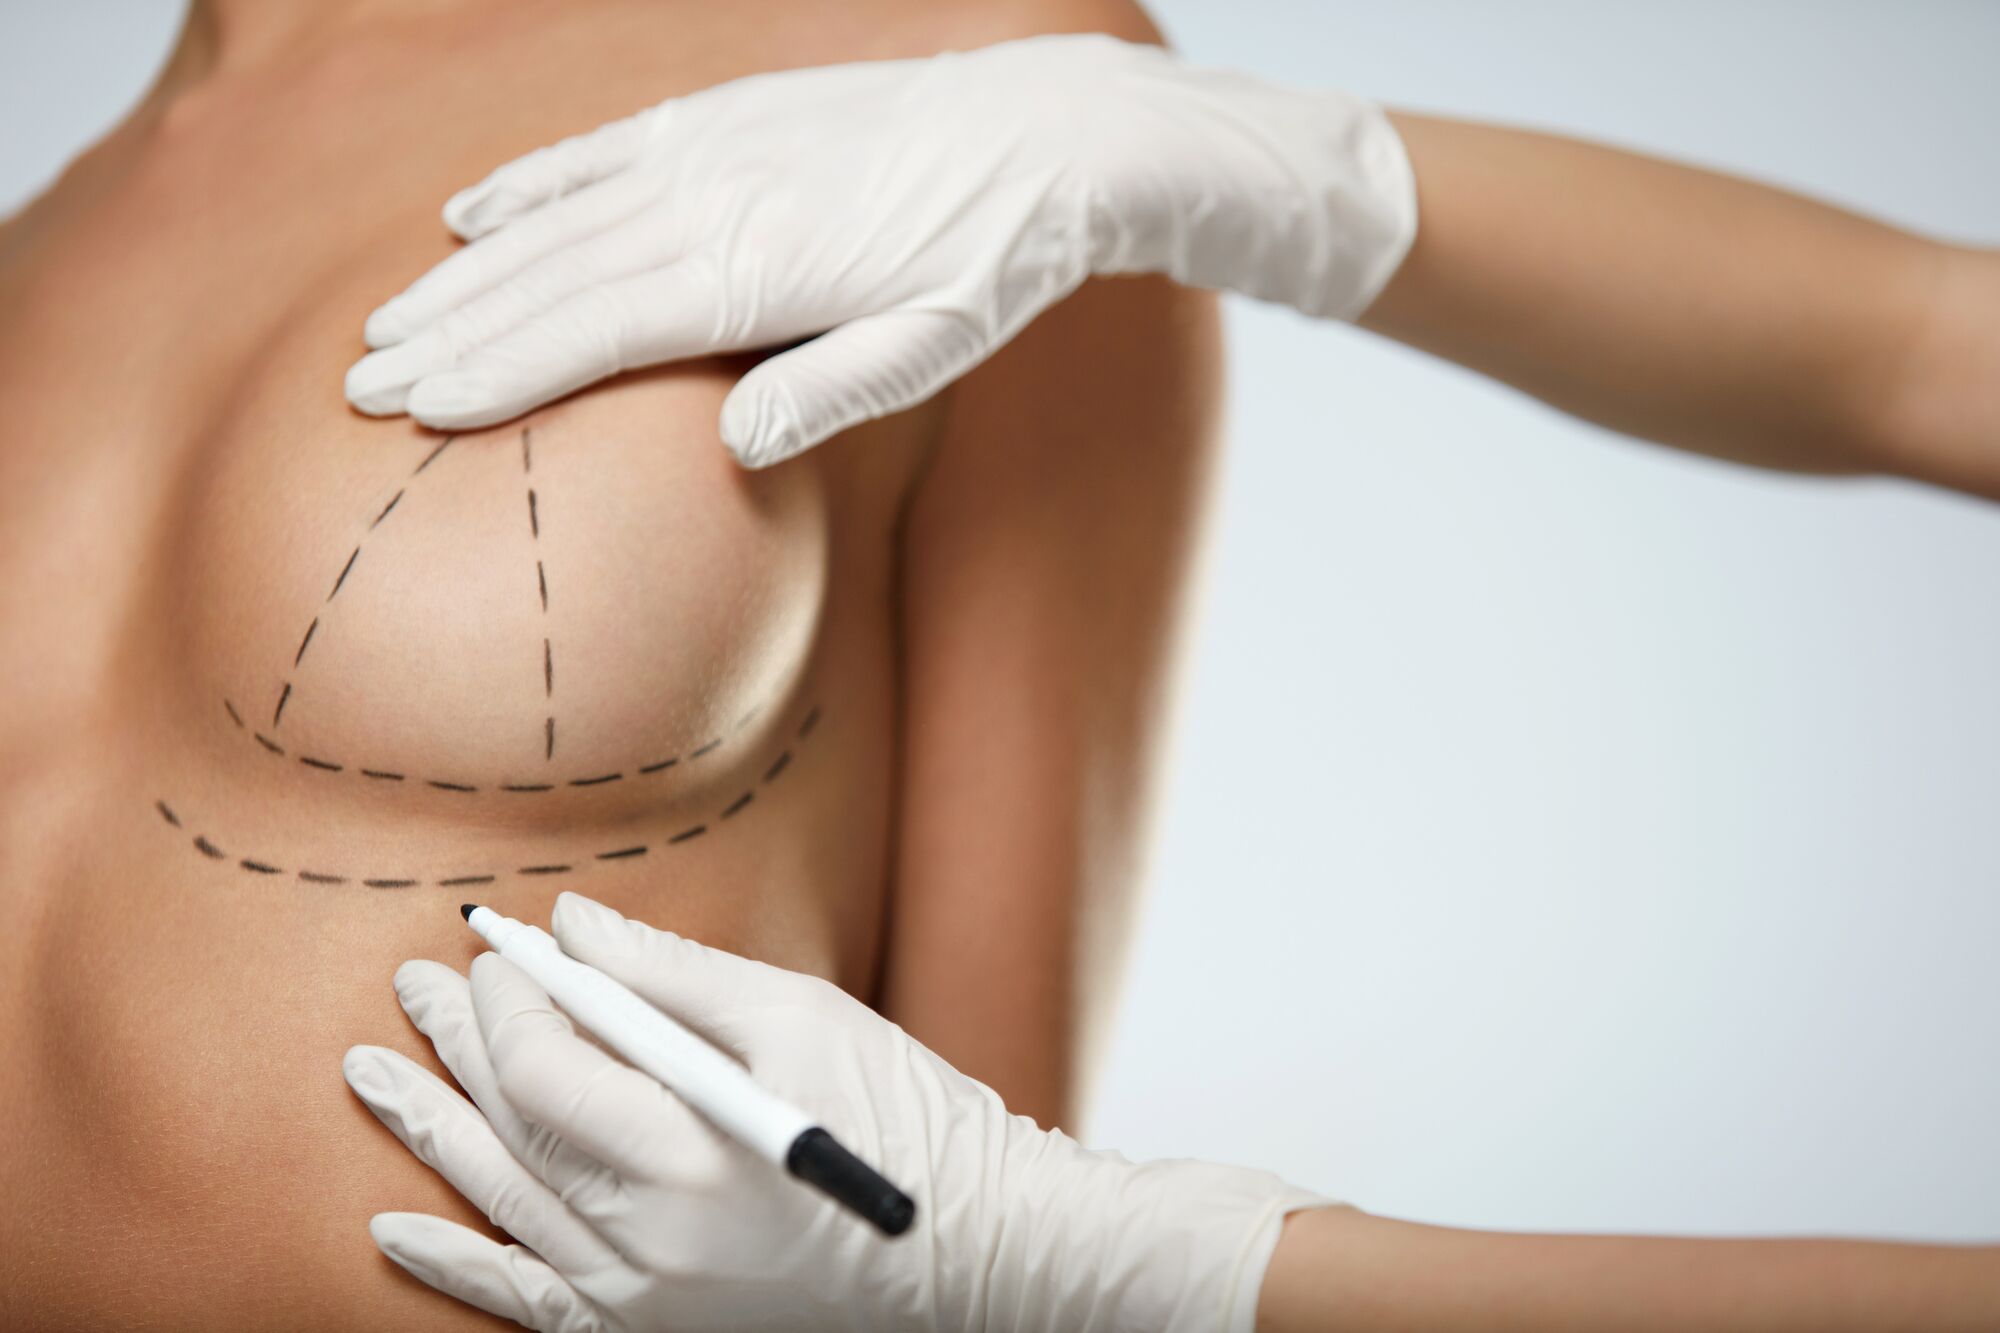 Mastopexy Recovery Tips: The Best Advice for a Breast Lift